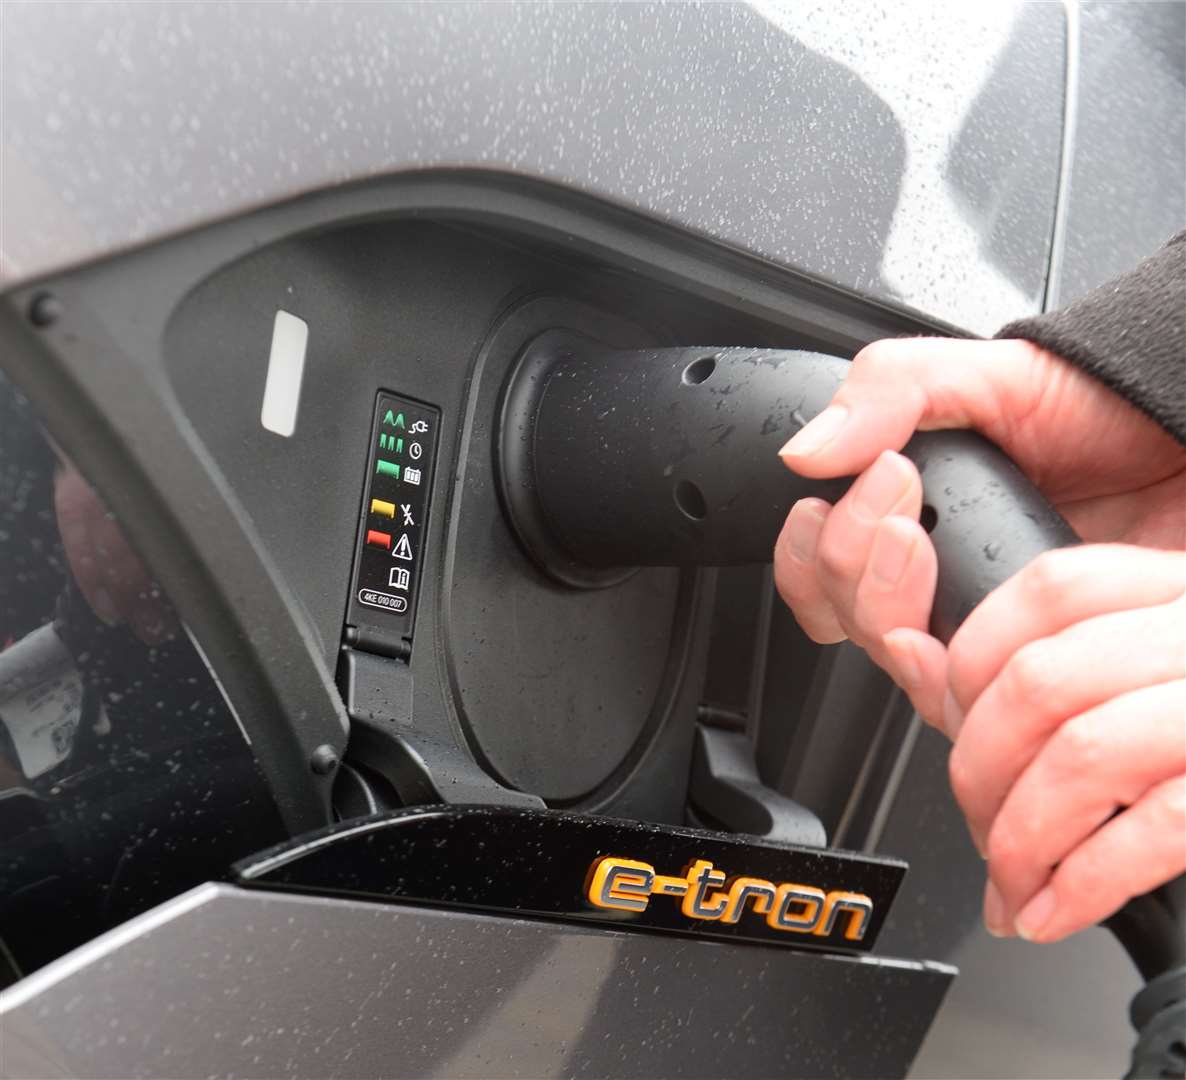 Views are sought in a bid to boost electric car use and charging technology infrastructure in the Highlands. Picture: Gary Anthony.